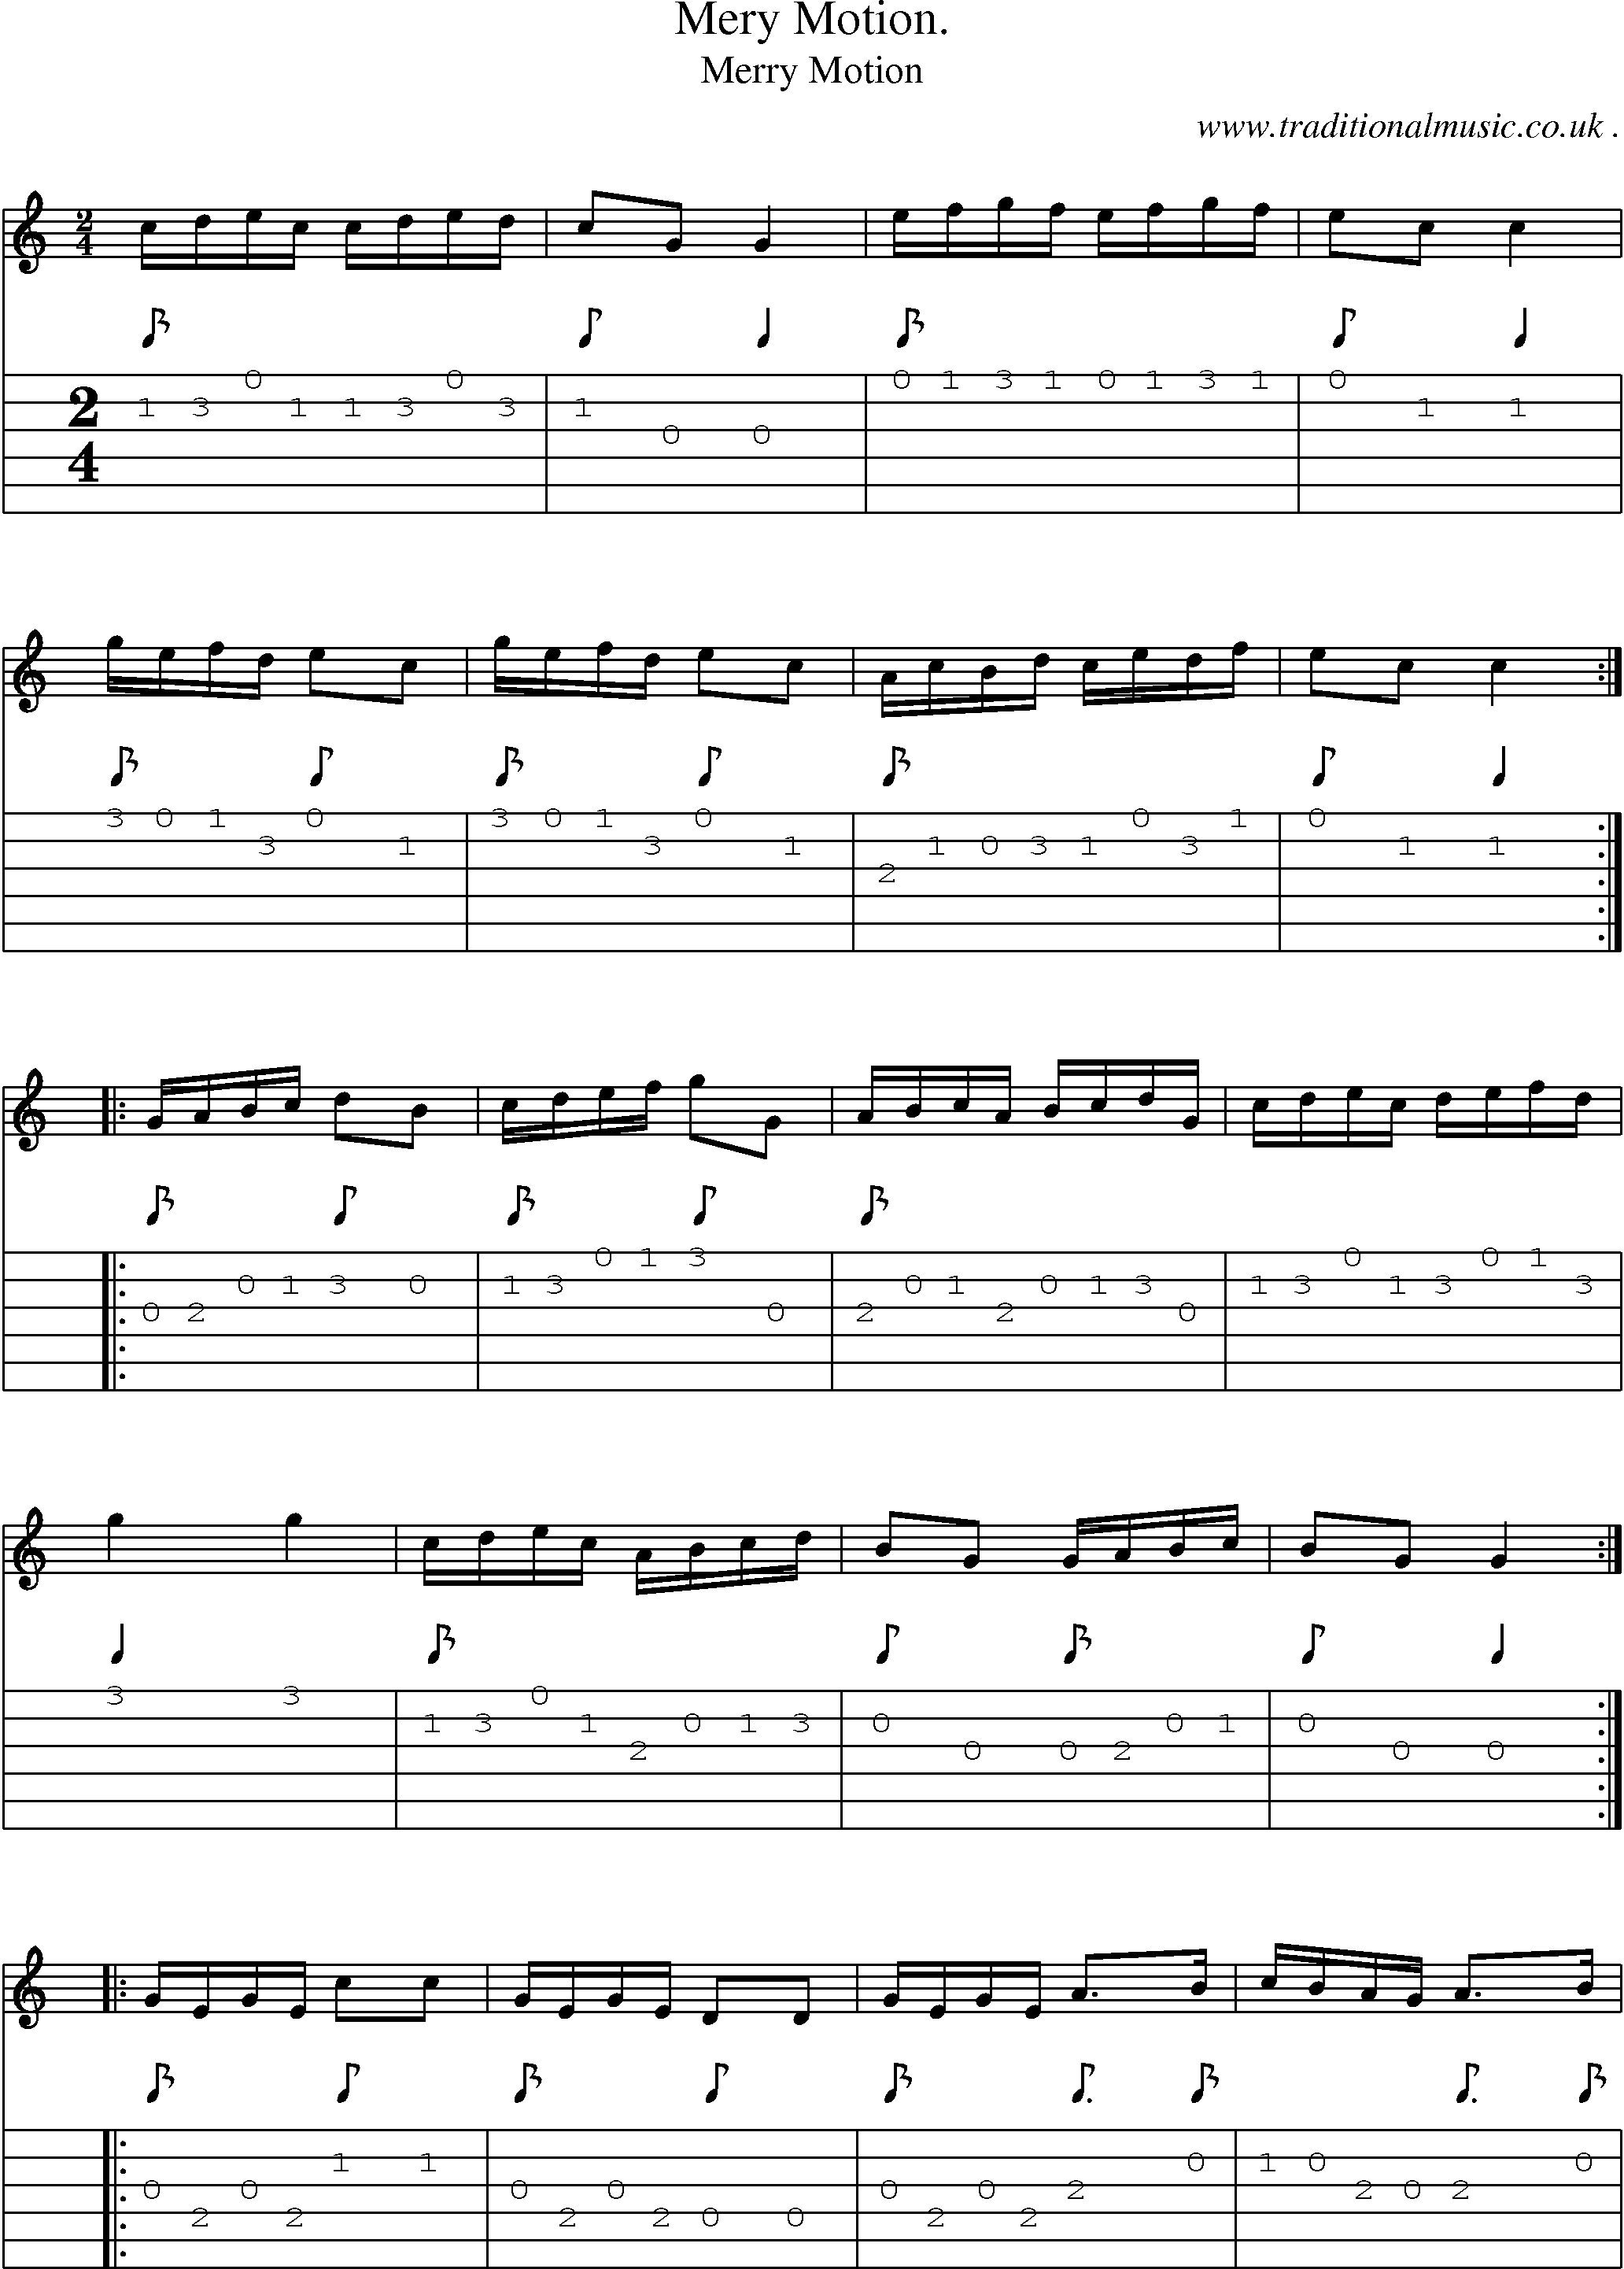 Sheet-Music and Guitar Tabs for Mery Motion